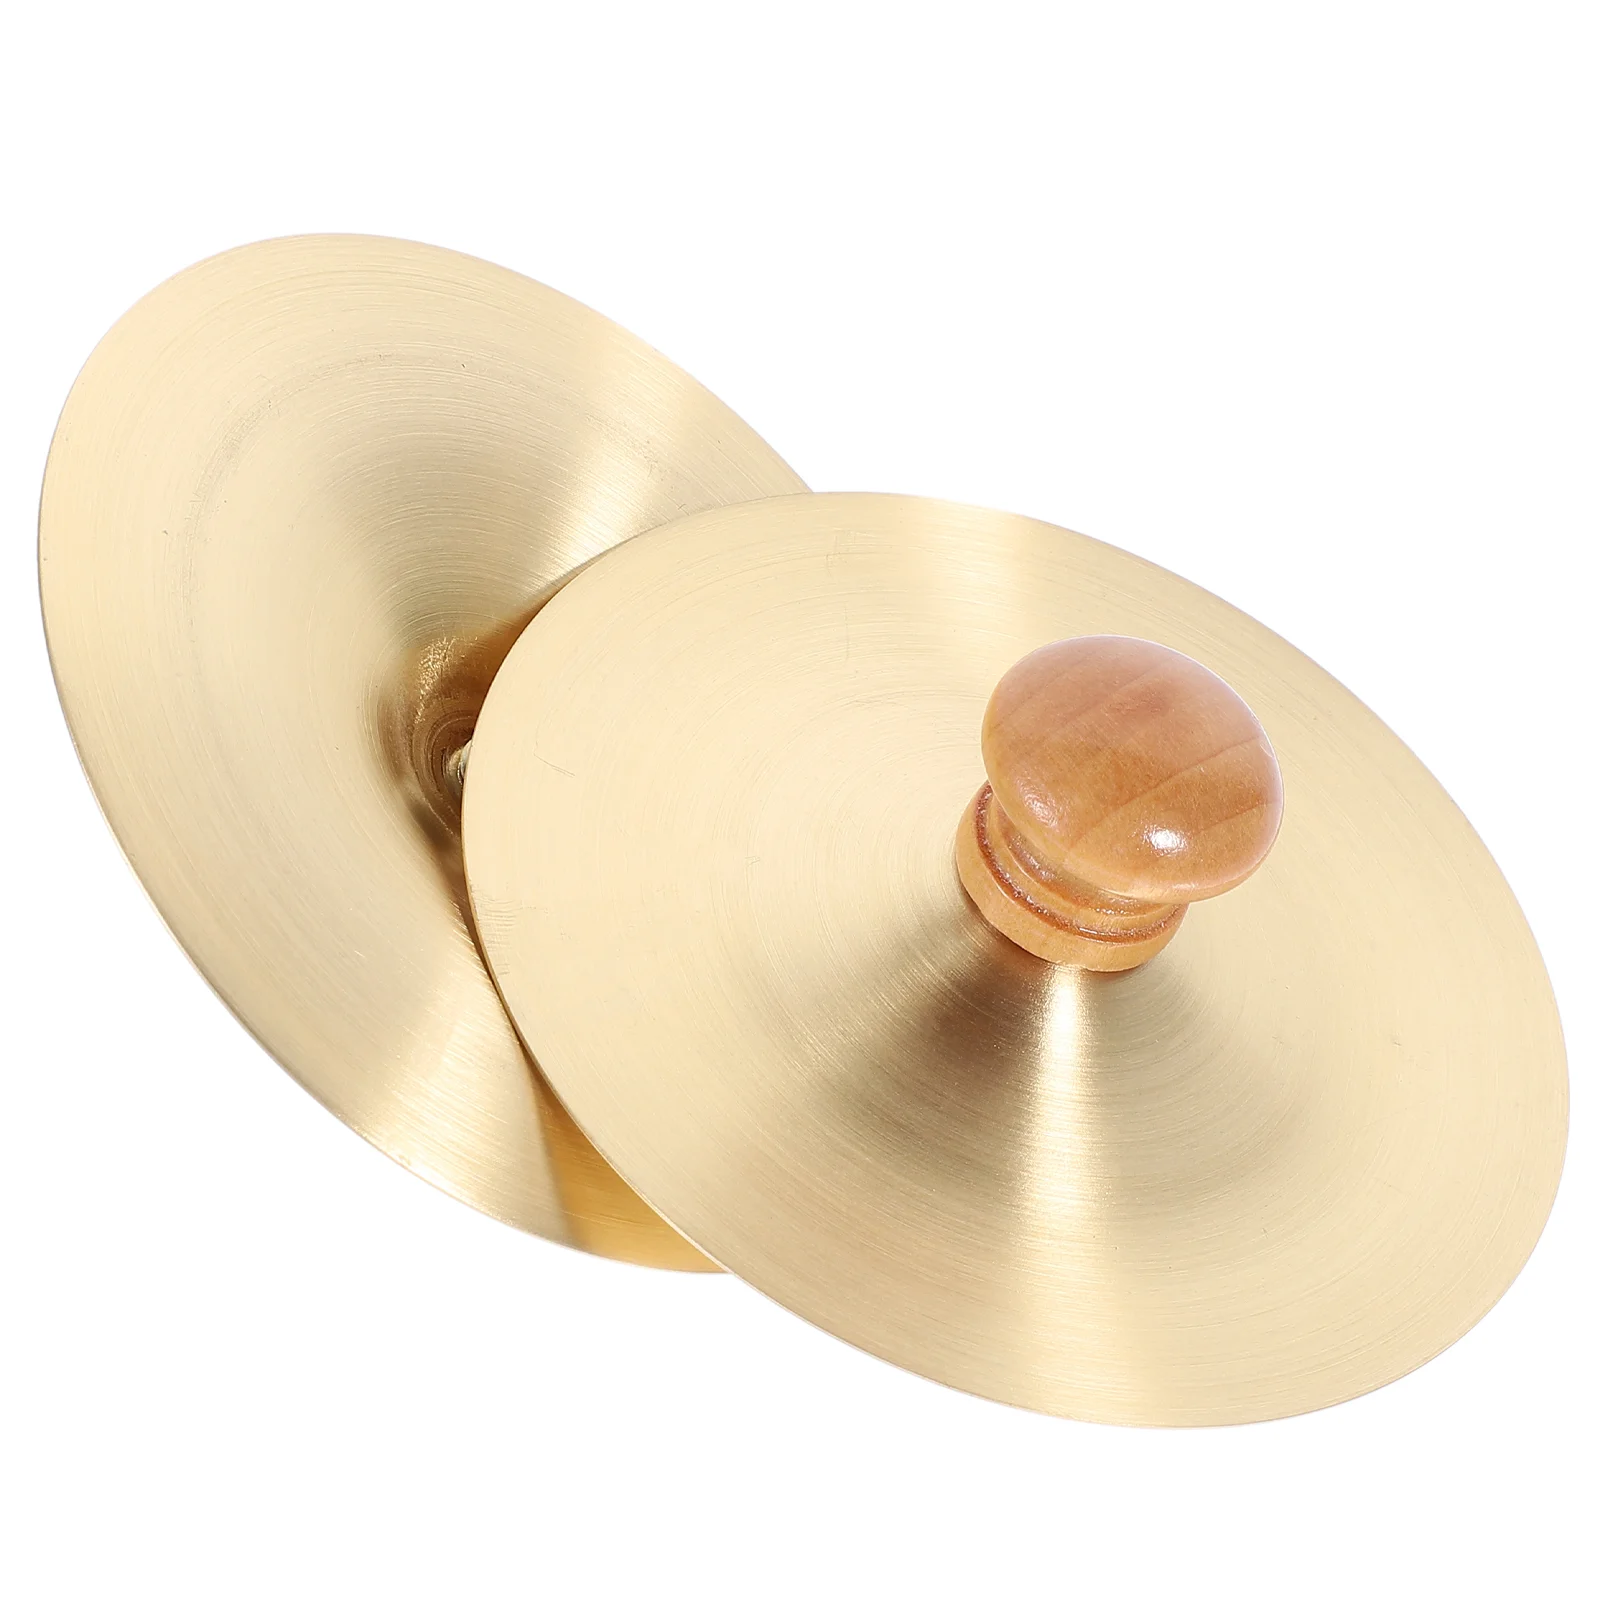 

2 Pcs Copper Cymbals Jing Wireless Ring Doorbell Belly Dancing Props Toy Percussion Kids Finger Instrument Miss